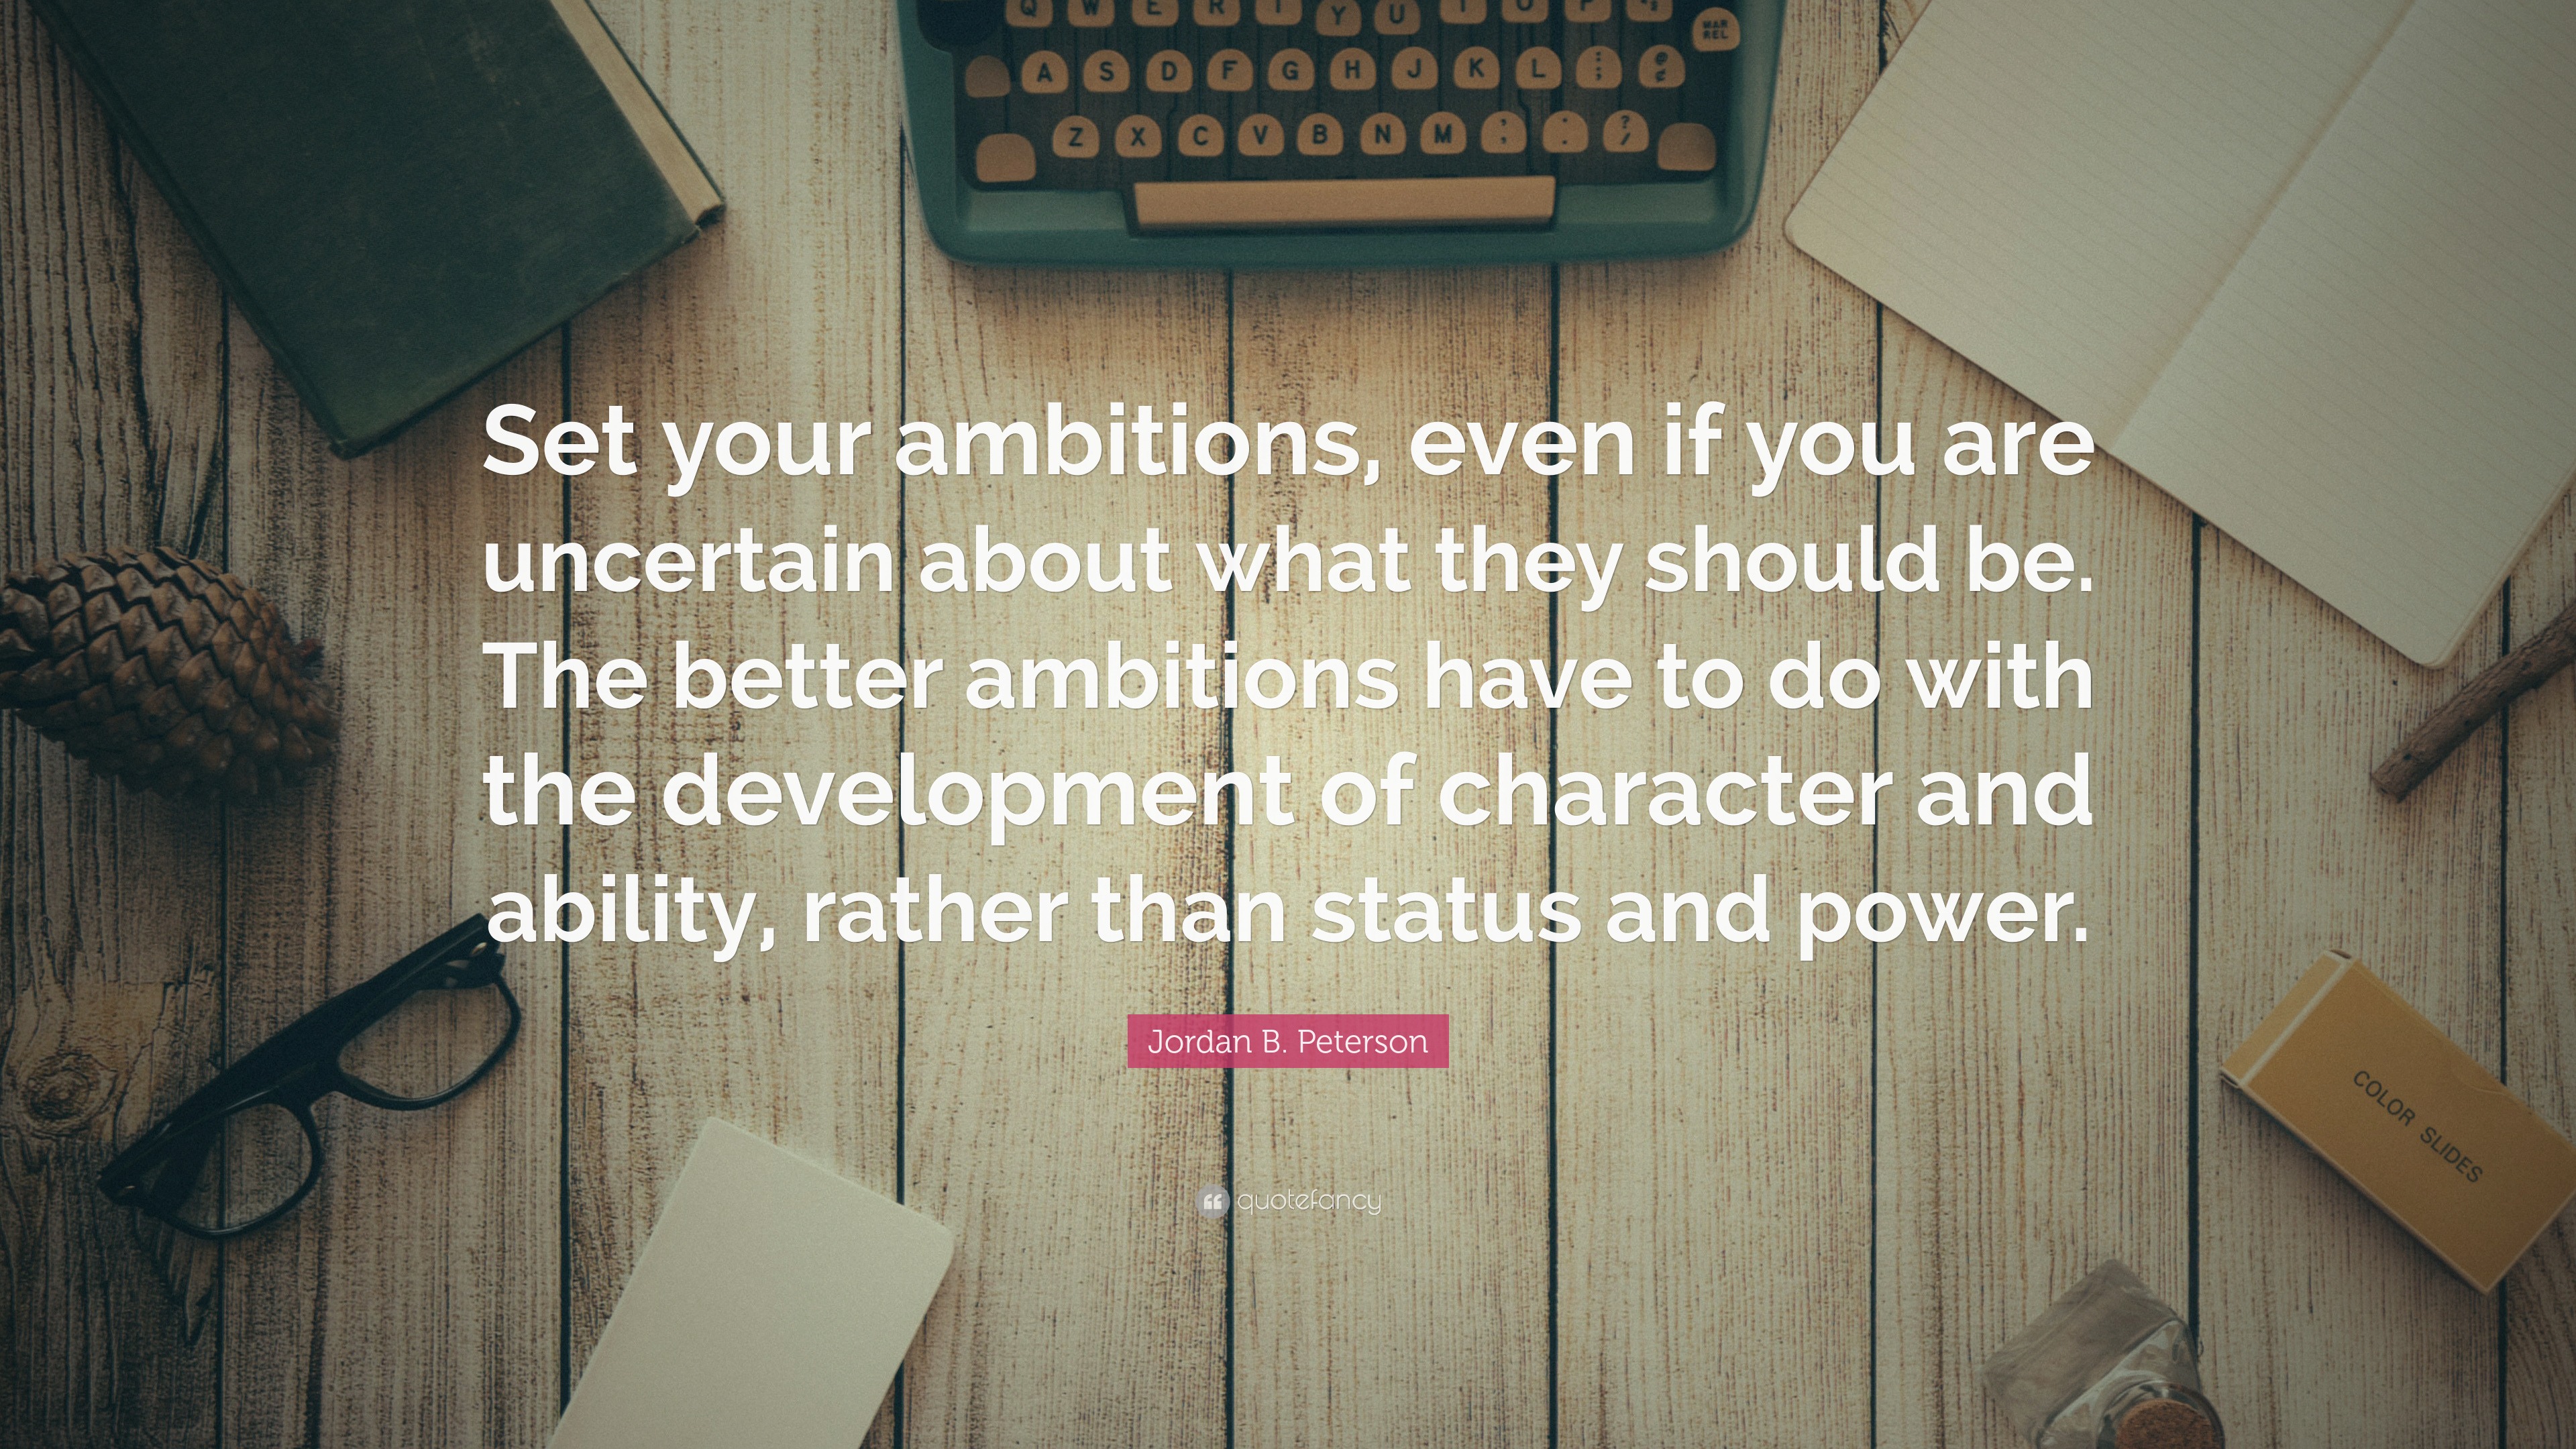 Jordan B. Peterson Quote: “Set your ambitions, even if you are